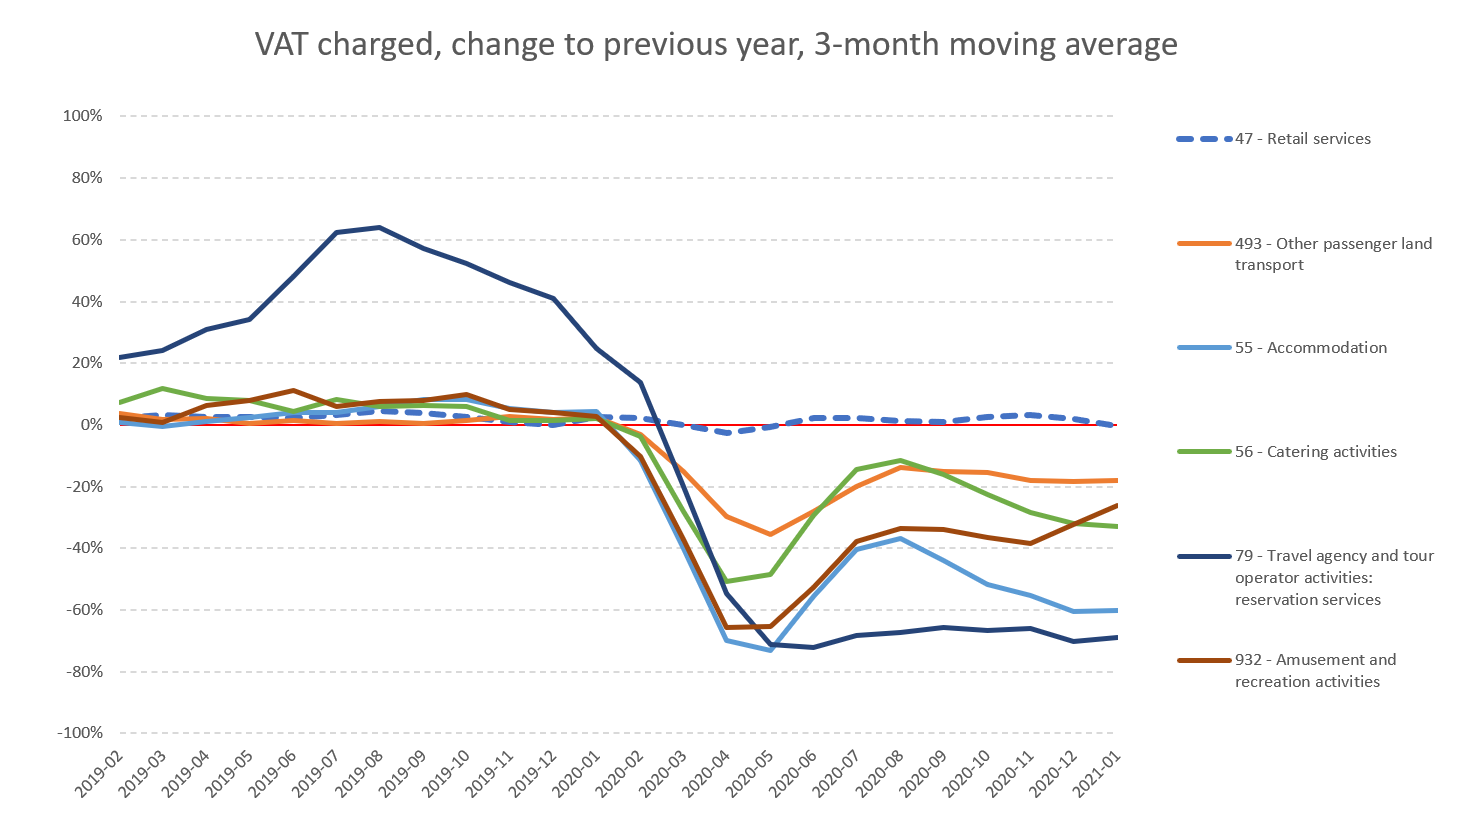 Year - on - year change in VAT charged